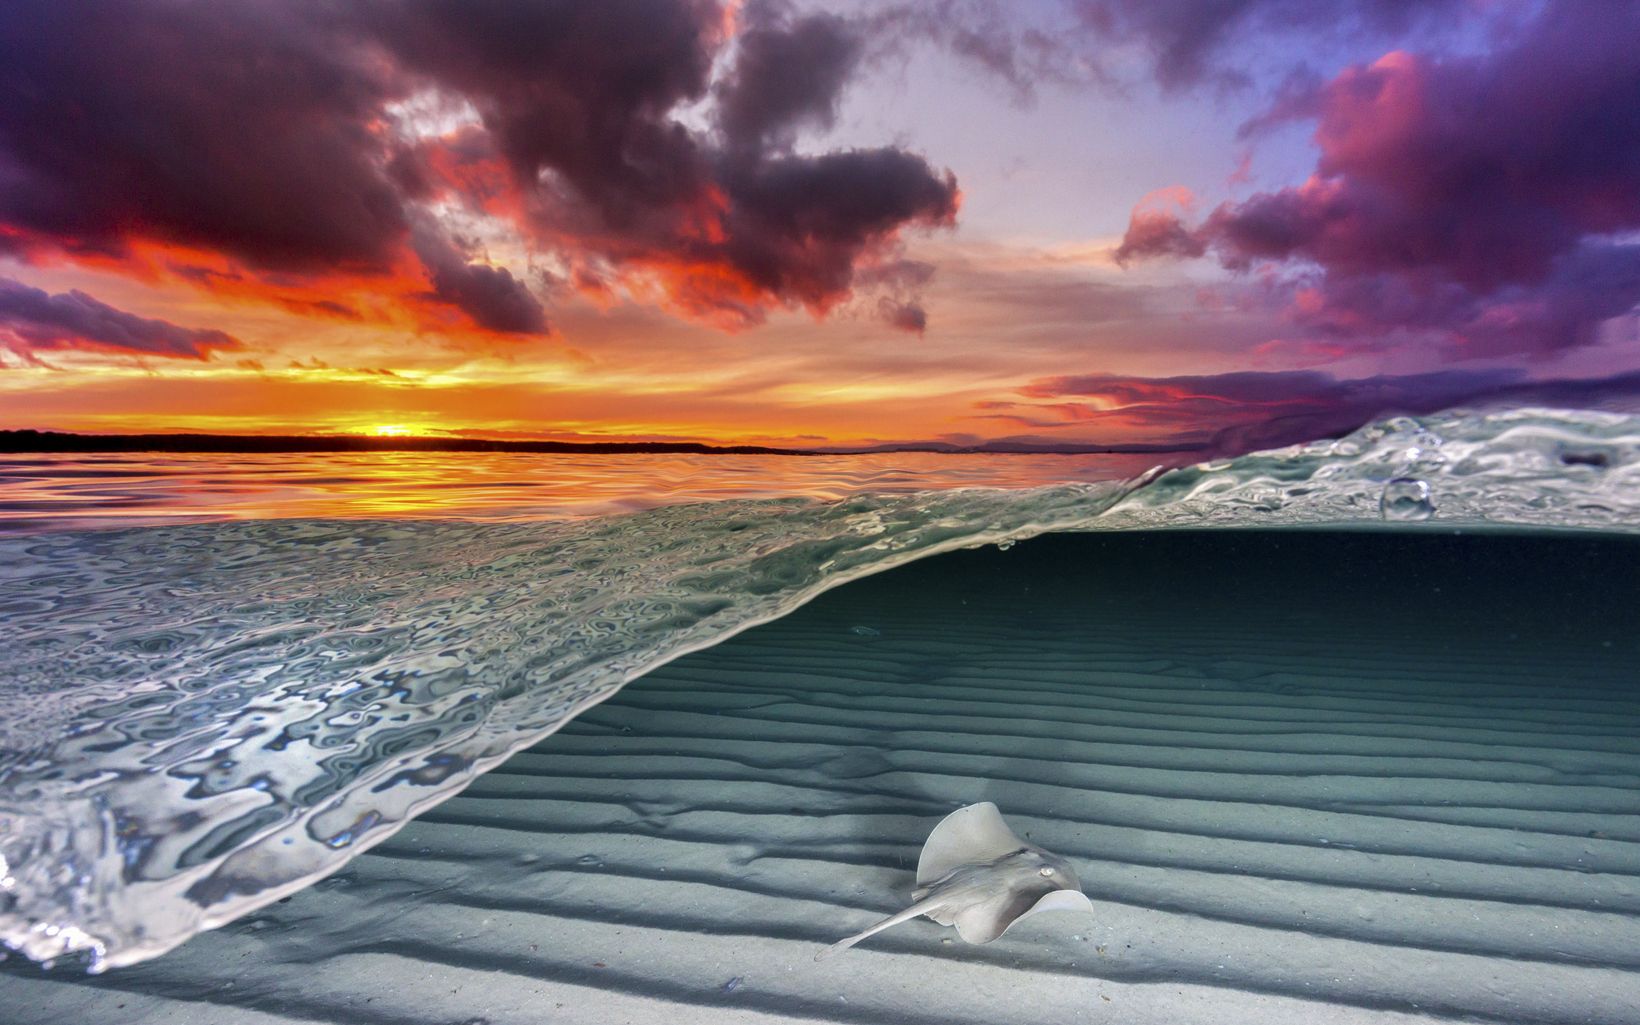 A common stingray gliding over the shallow sand flats as the sky bursts to life with color from the setting sun